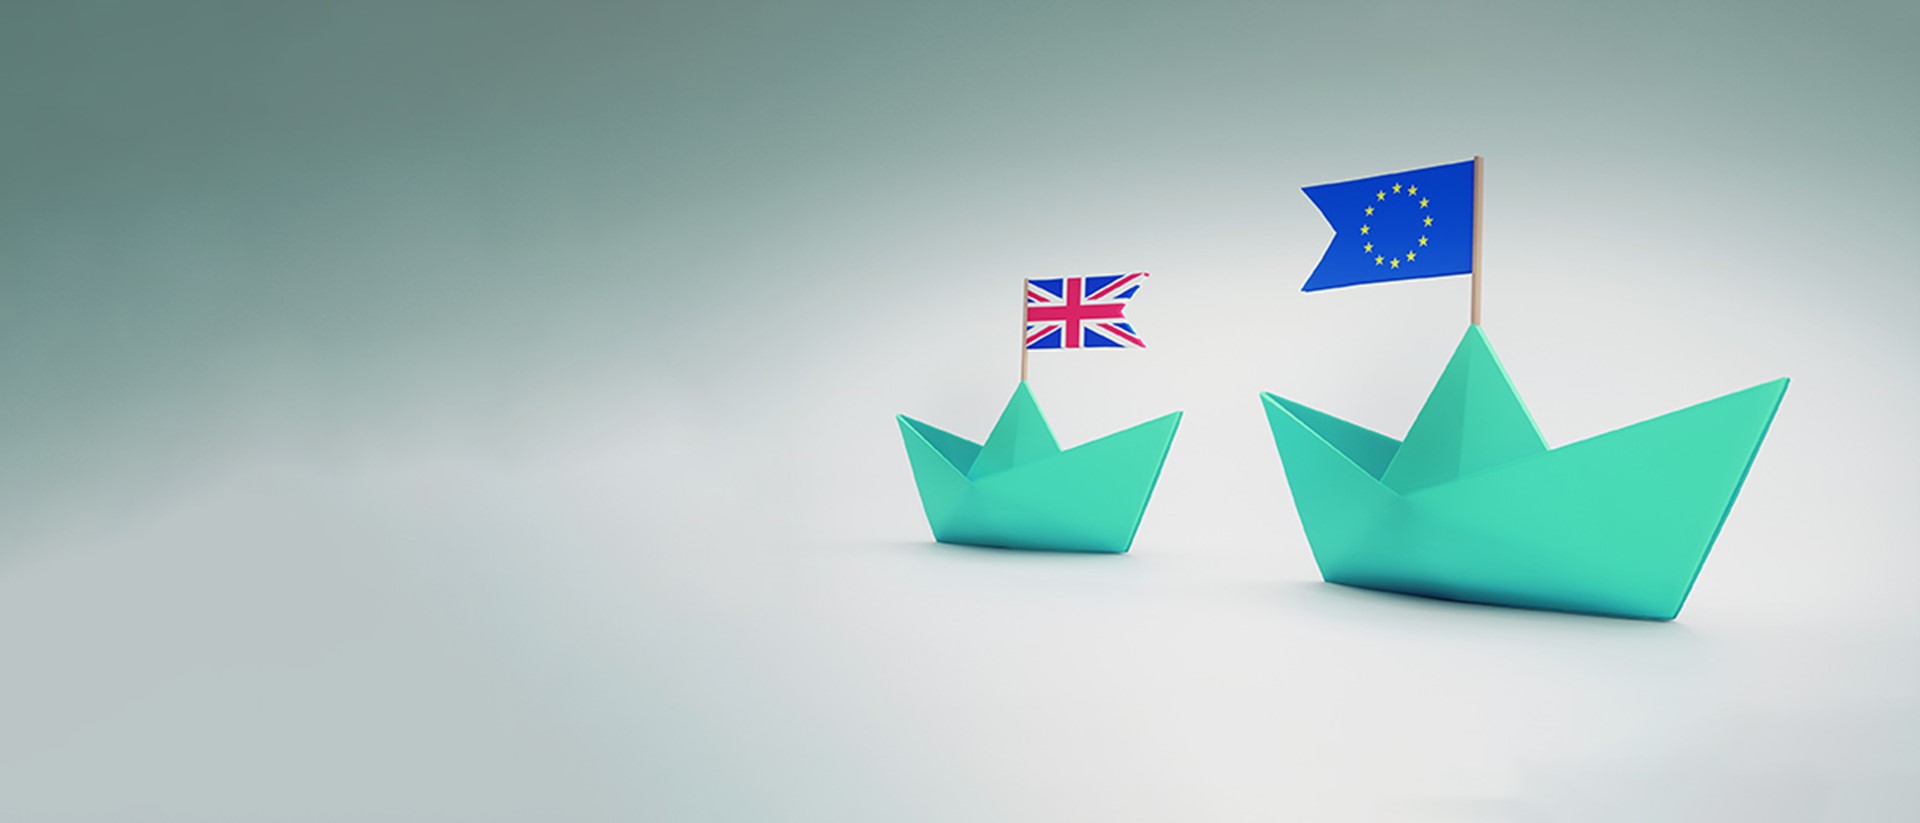 Image of blue paper boats with a union jack flag on one and the European flag in the other